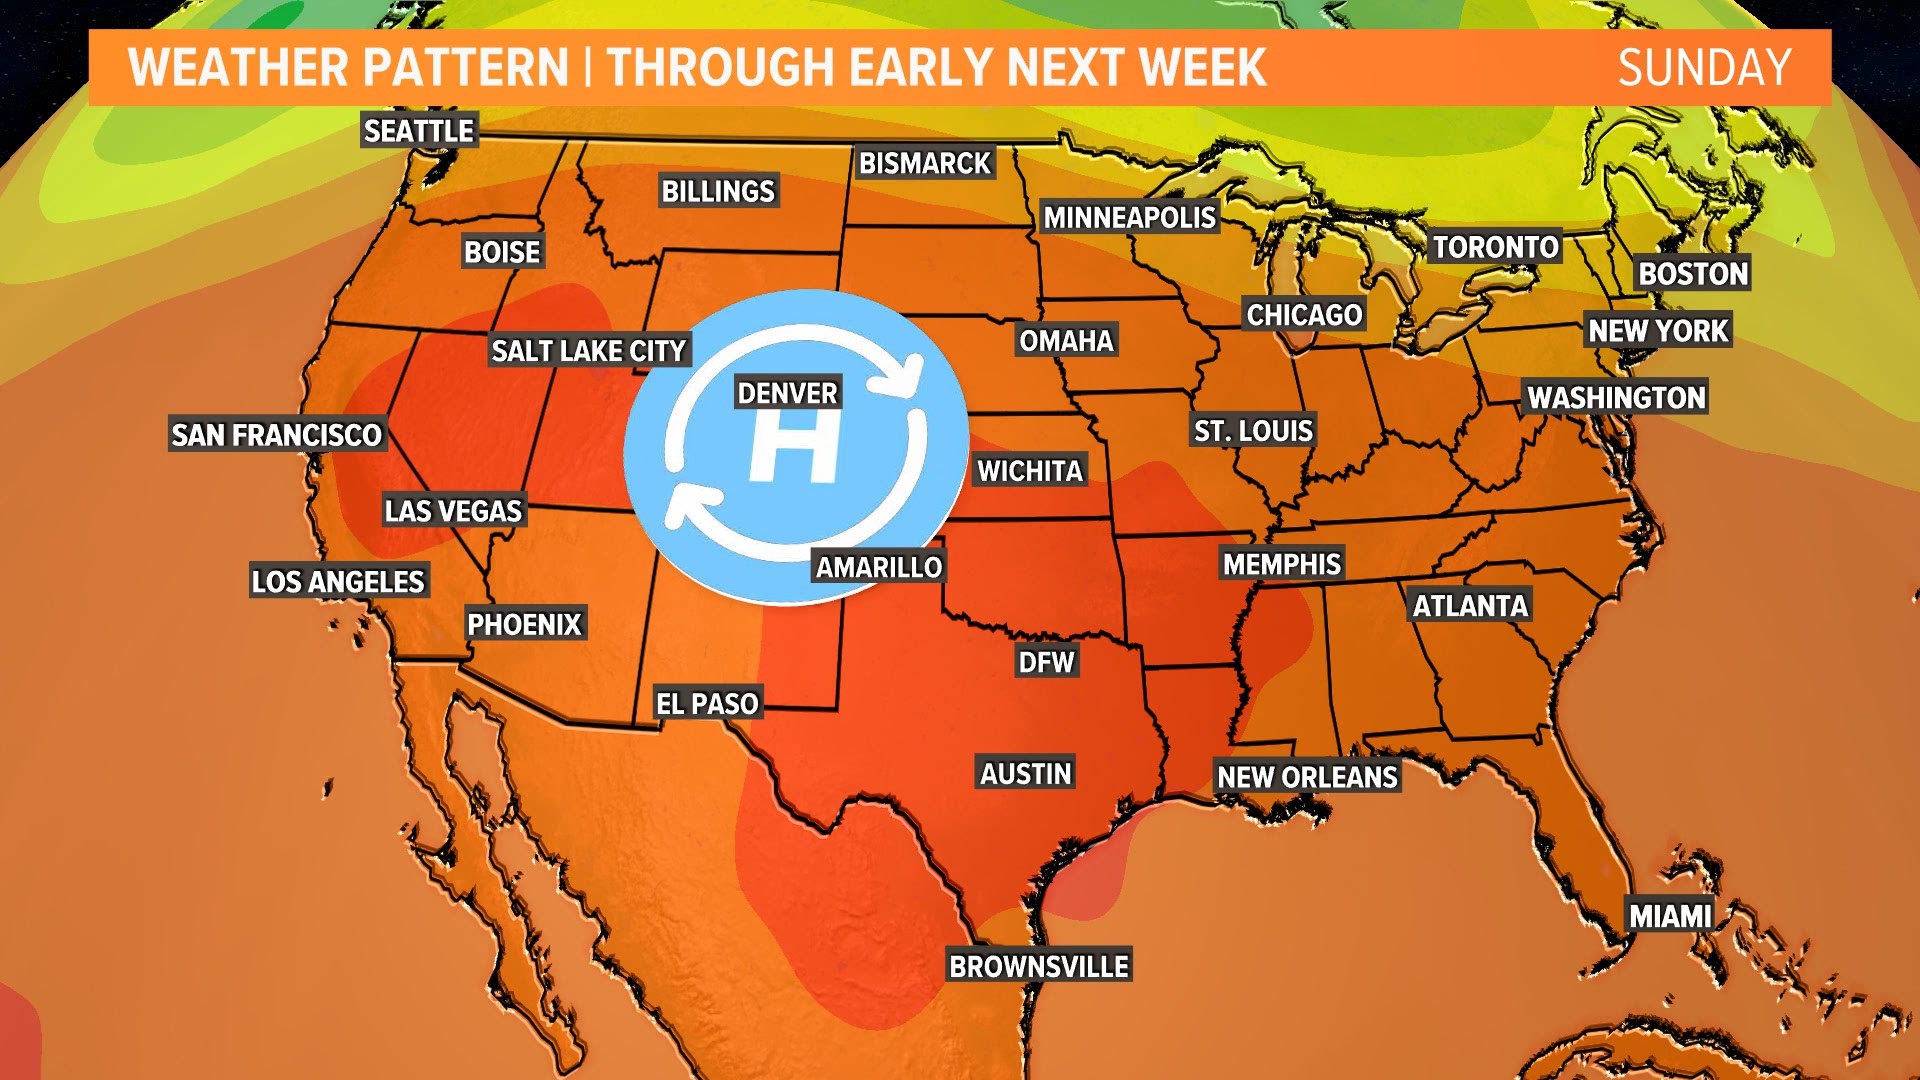 Typical Summer Weather Pattern Takes Hold